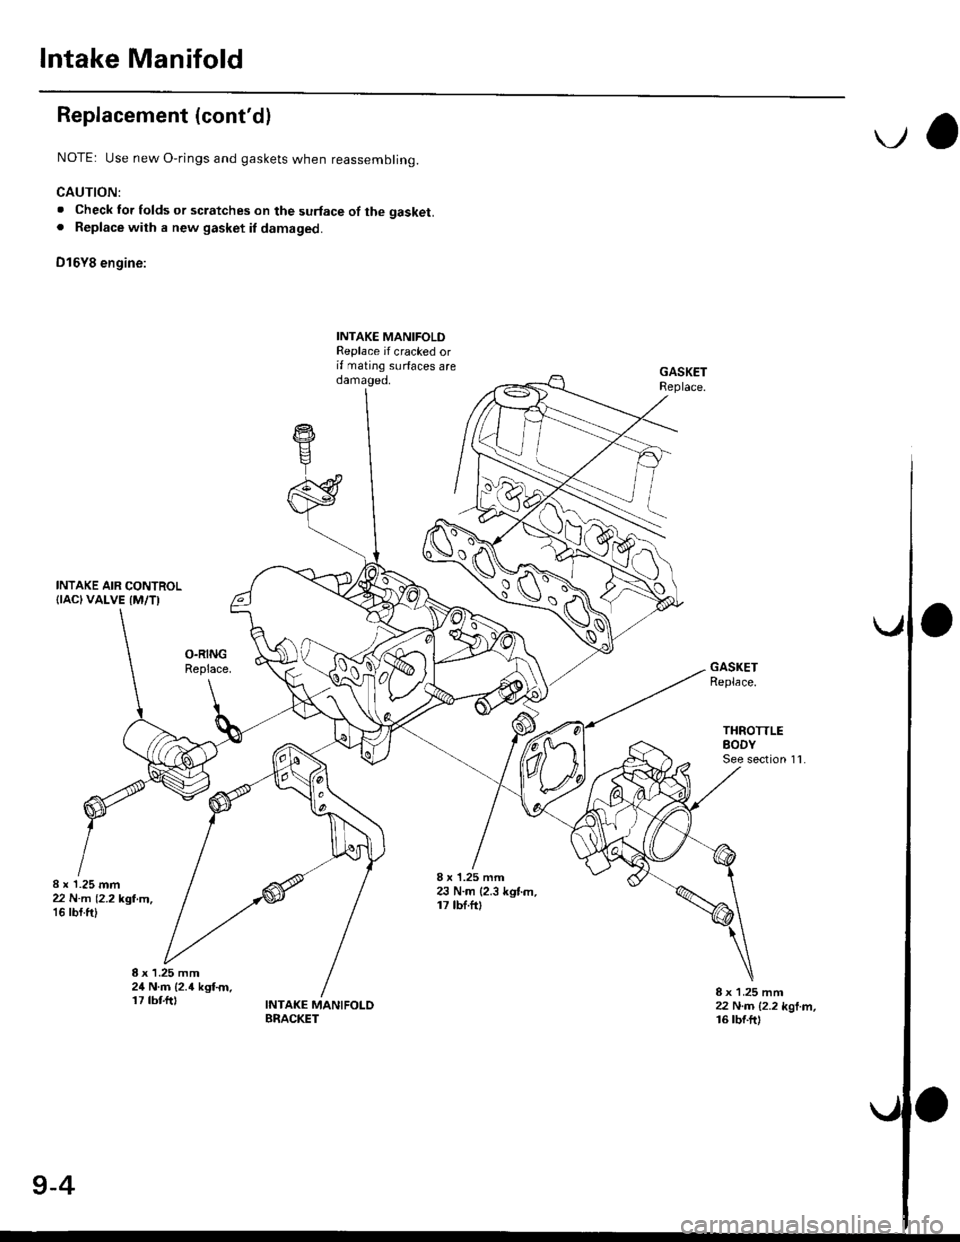 HONDA CIVIC 1996 6.G Workshop Manual lntake Manifold
Replacement (contdl
NOTE: Use new O,rings and gaskets when reassembling.
CAUTION:
. Check lor folds or scratches on the surface of the gasket.. Replace with a new gasket il damaged.
D